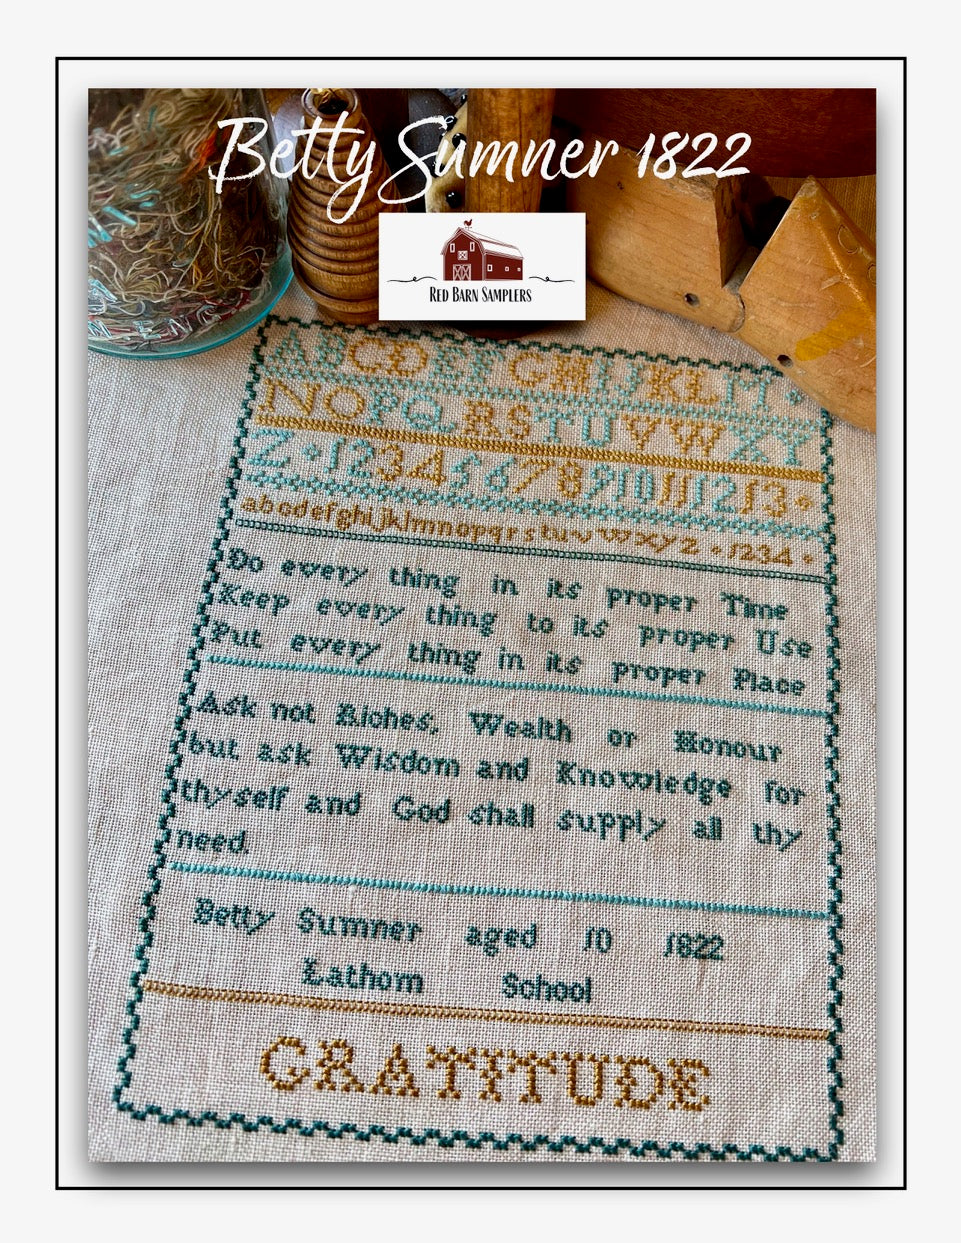 Betty Sumner 1822 by Red Barn Samplers